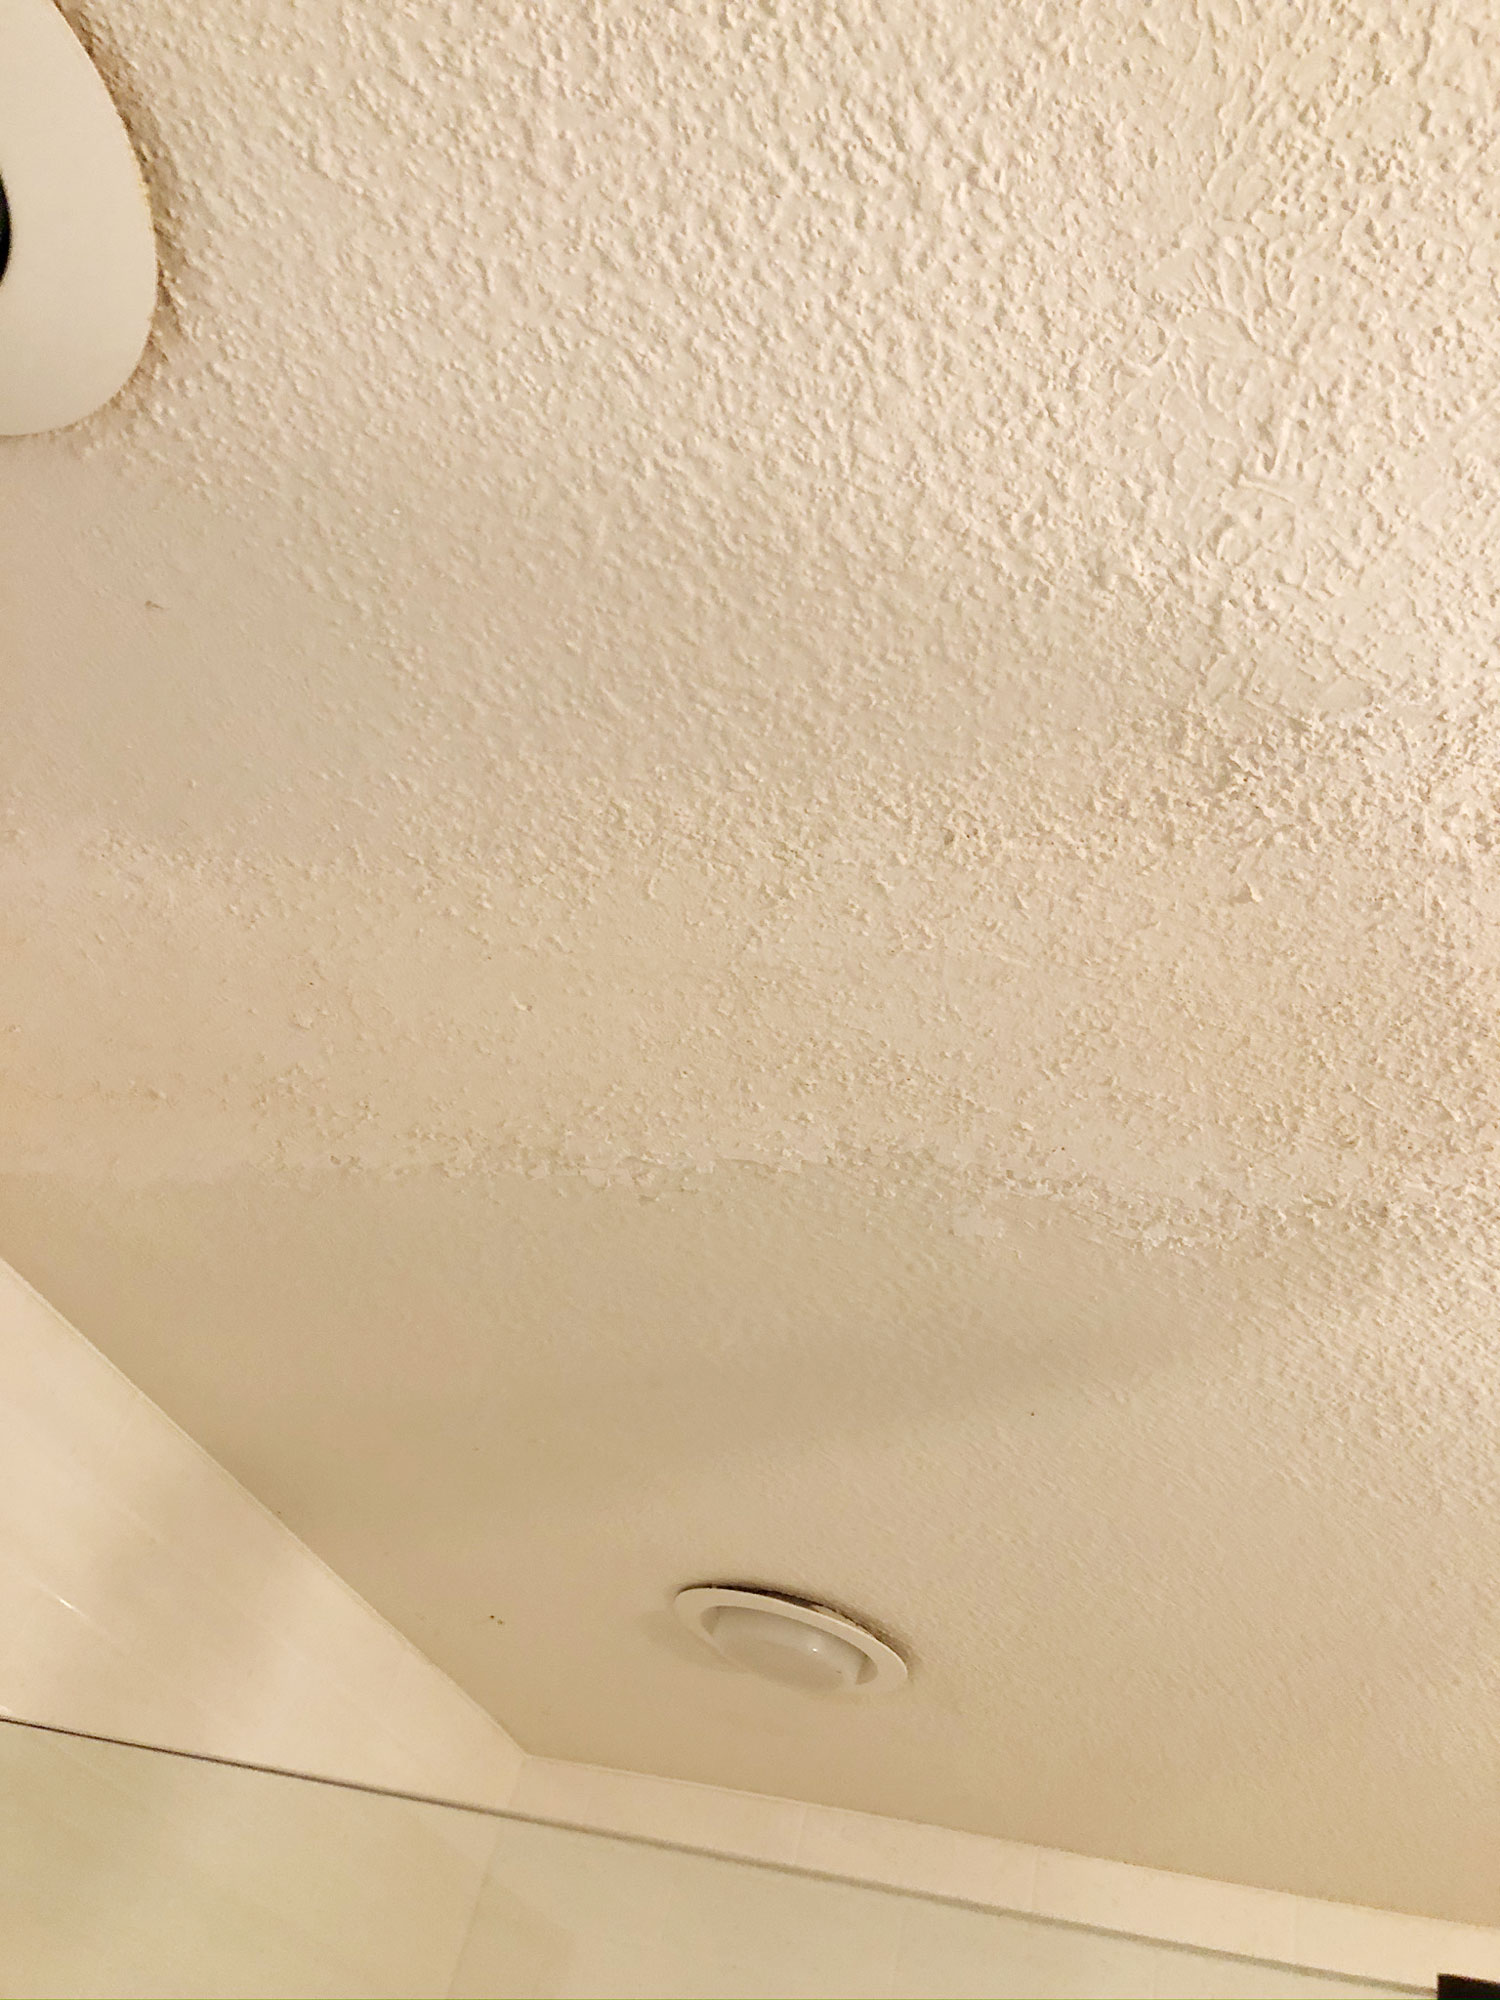 Patch A Textured Popcorn Ceiling